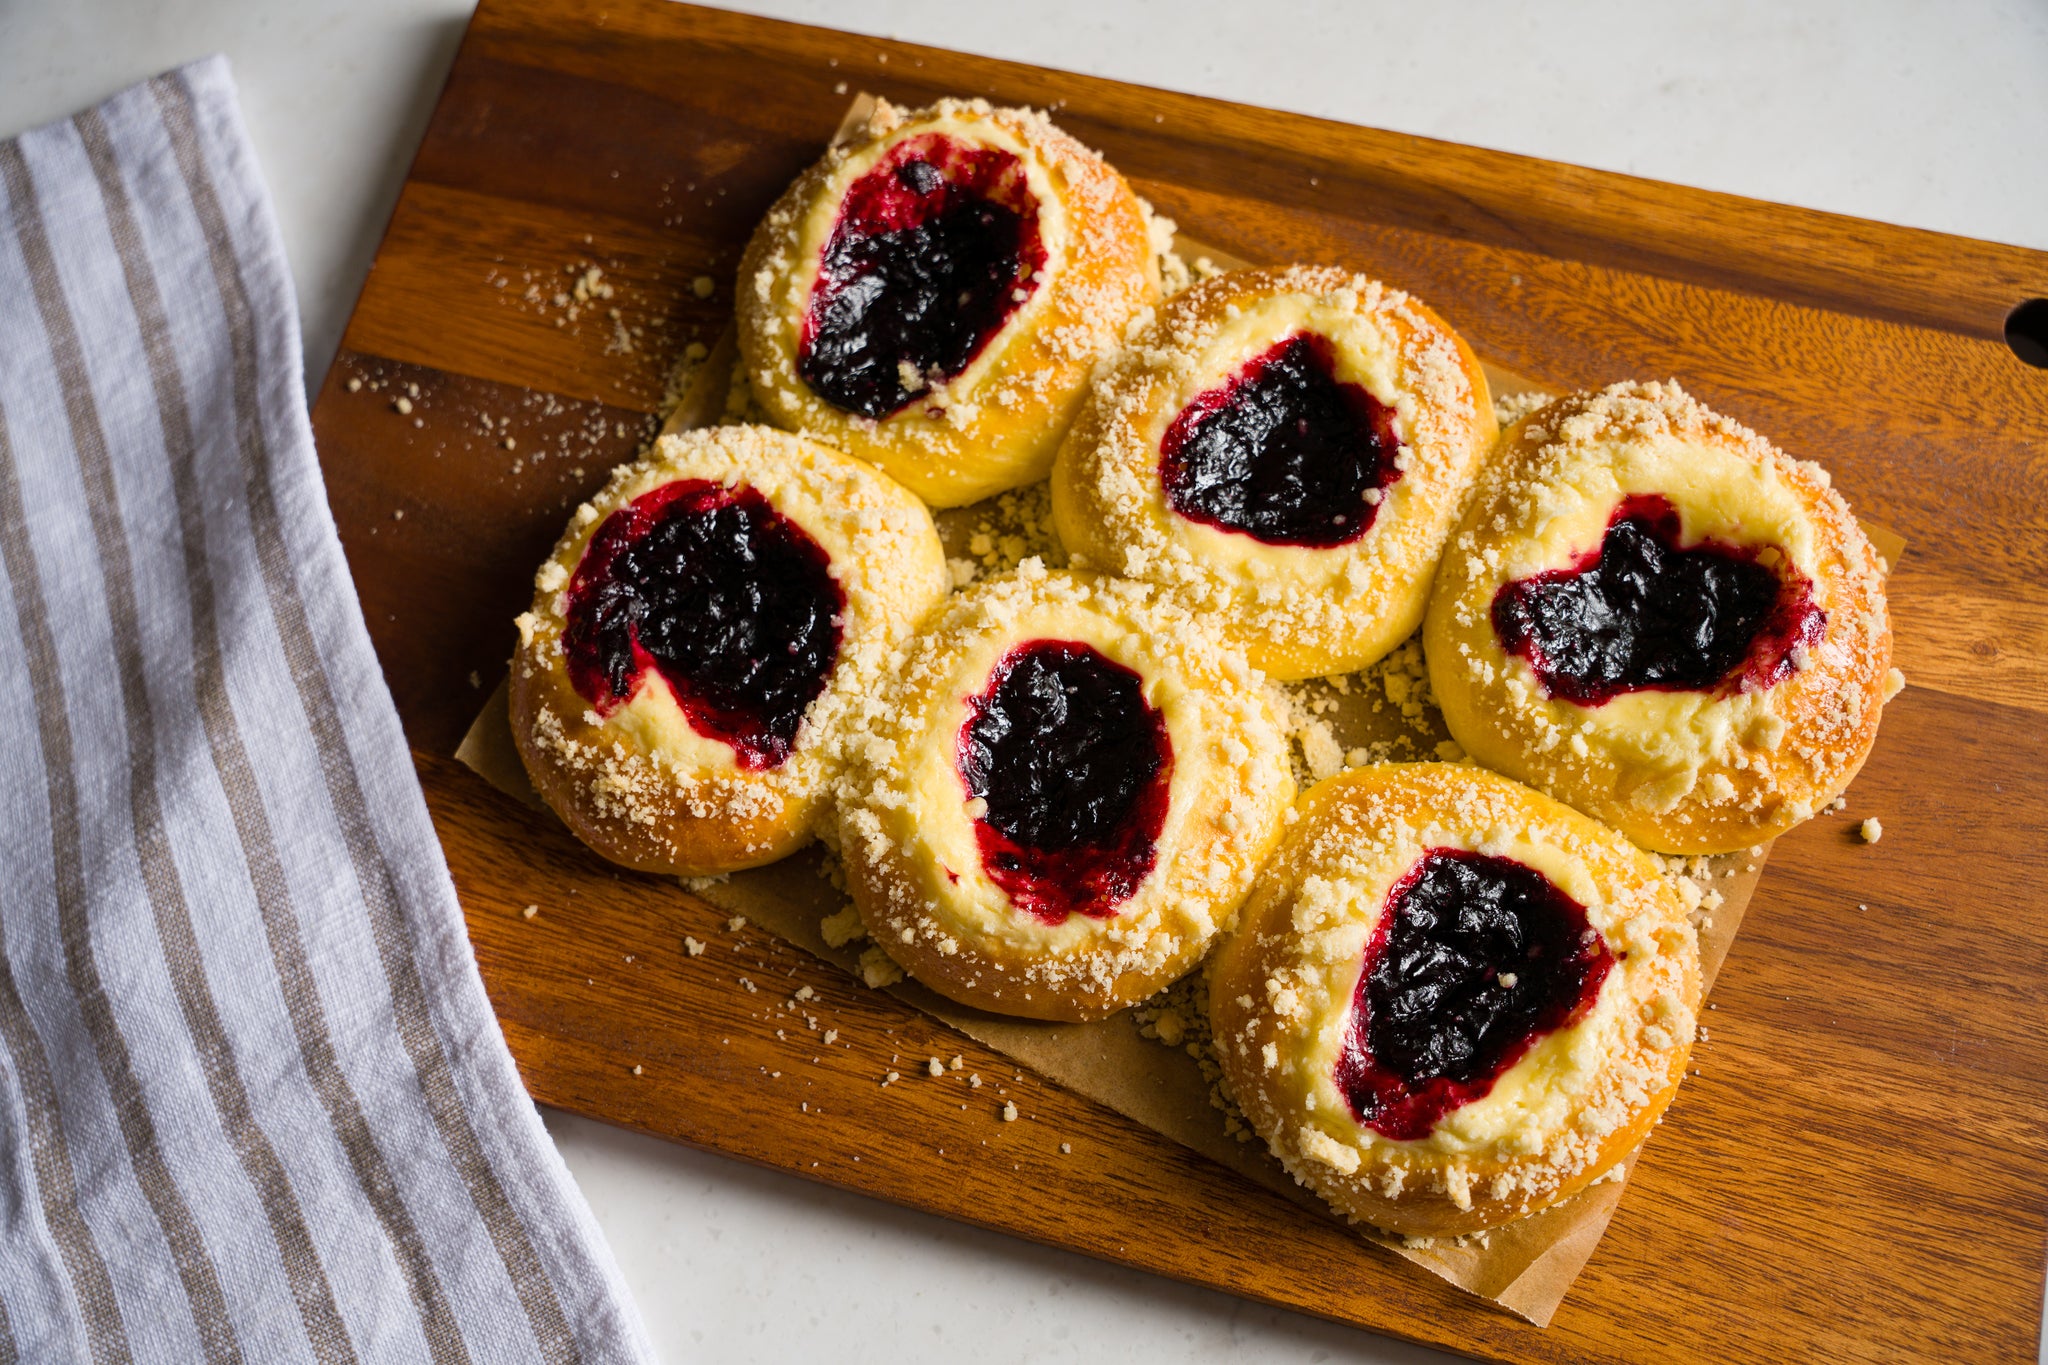 Six cherry cheese kolaches on a wooden cutting board